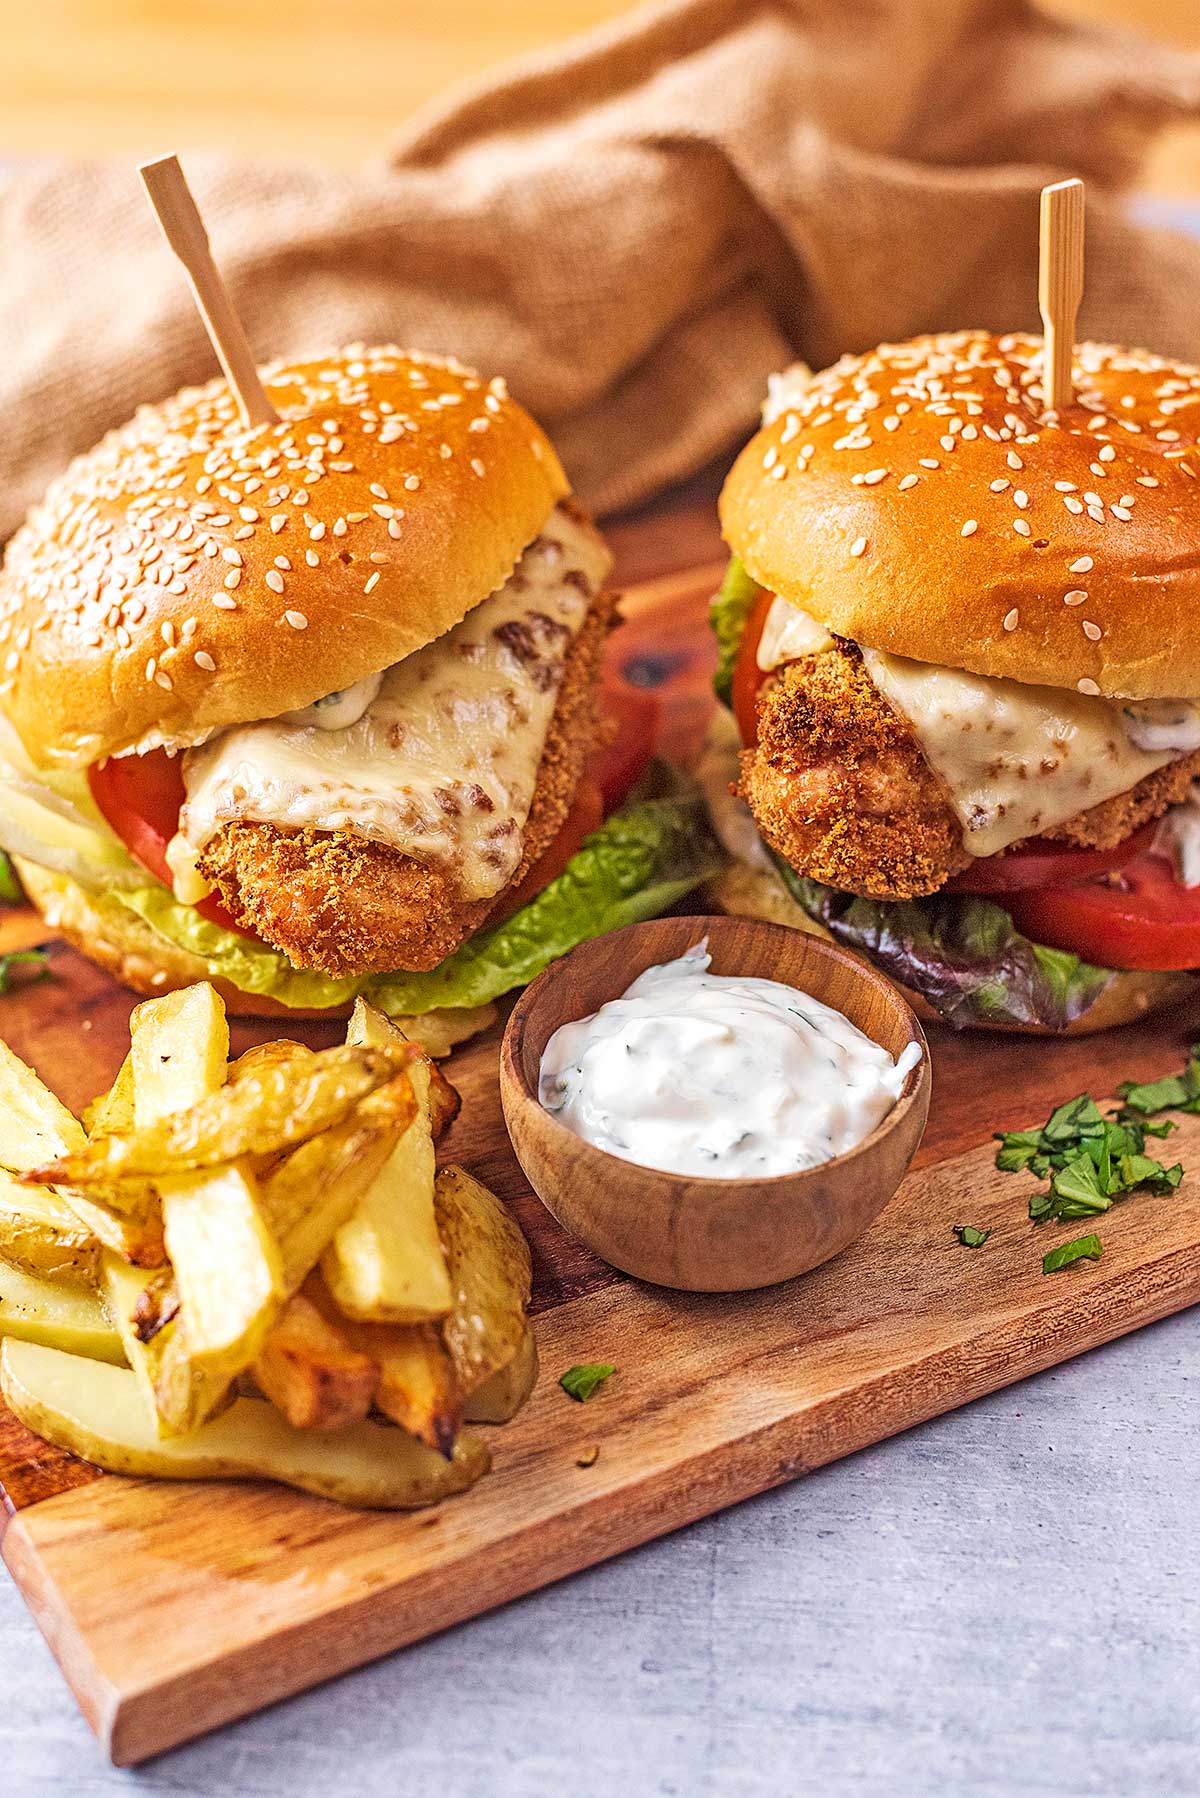 Two chicken burgers with fries and dip on a wooden serving board